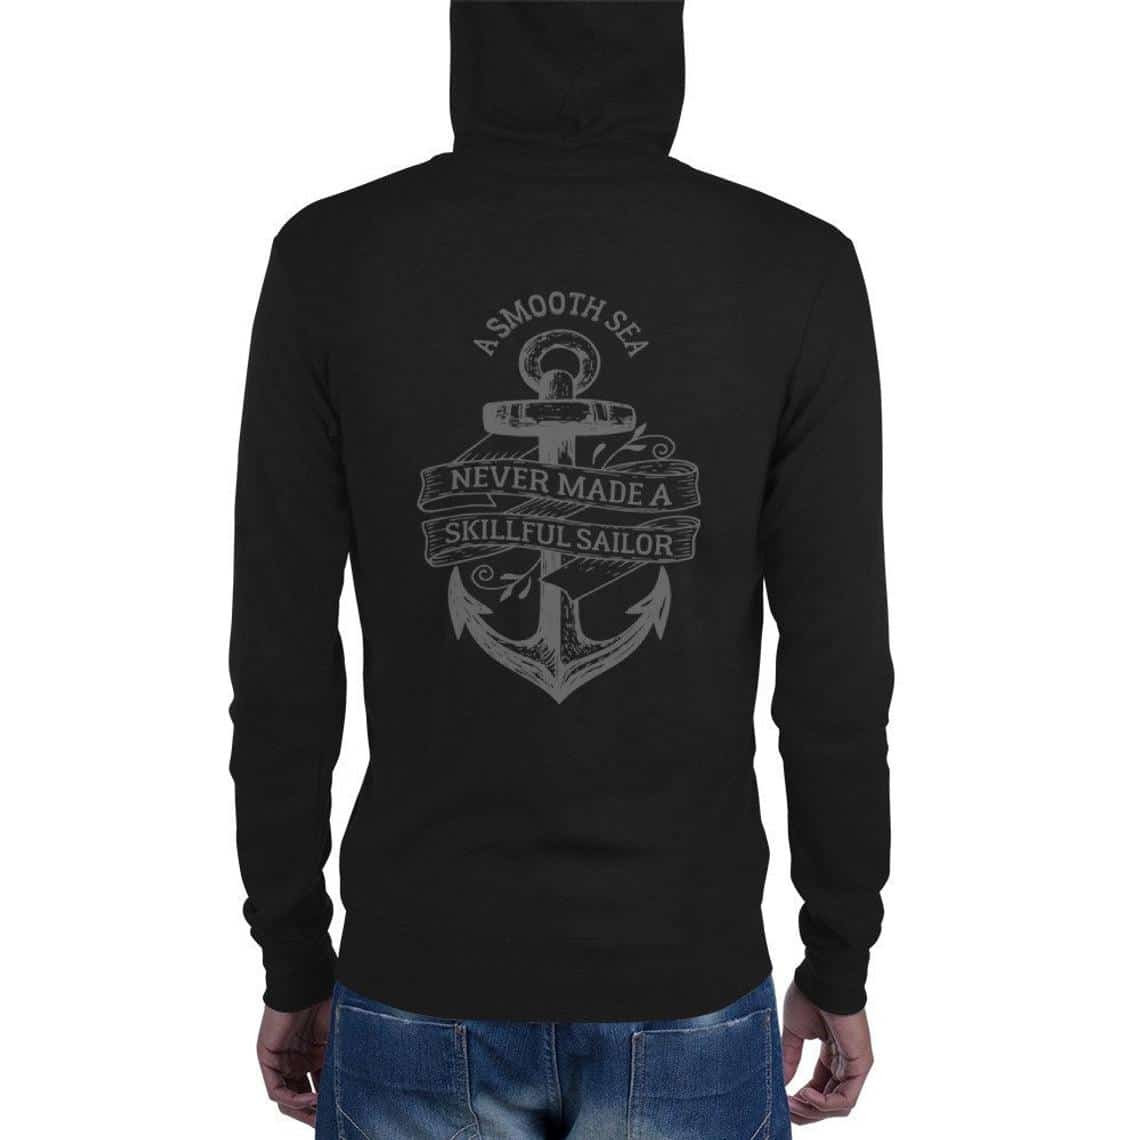 Unisex Hoodie Perfect for a Sailing Course